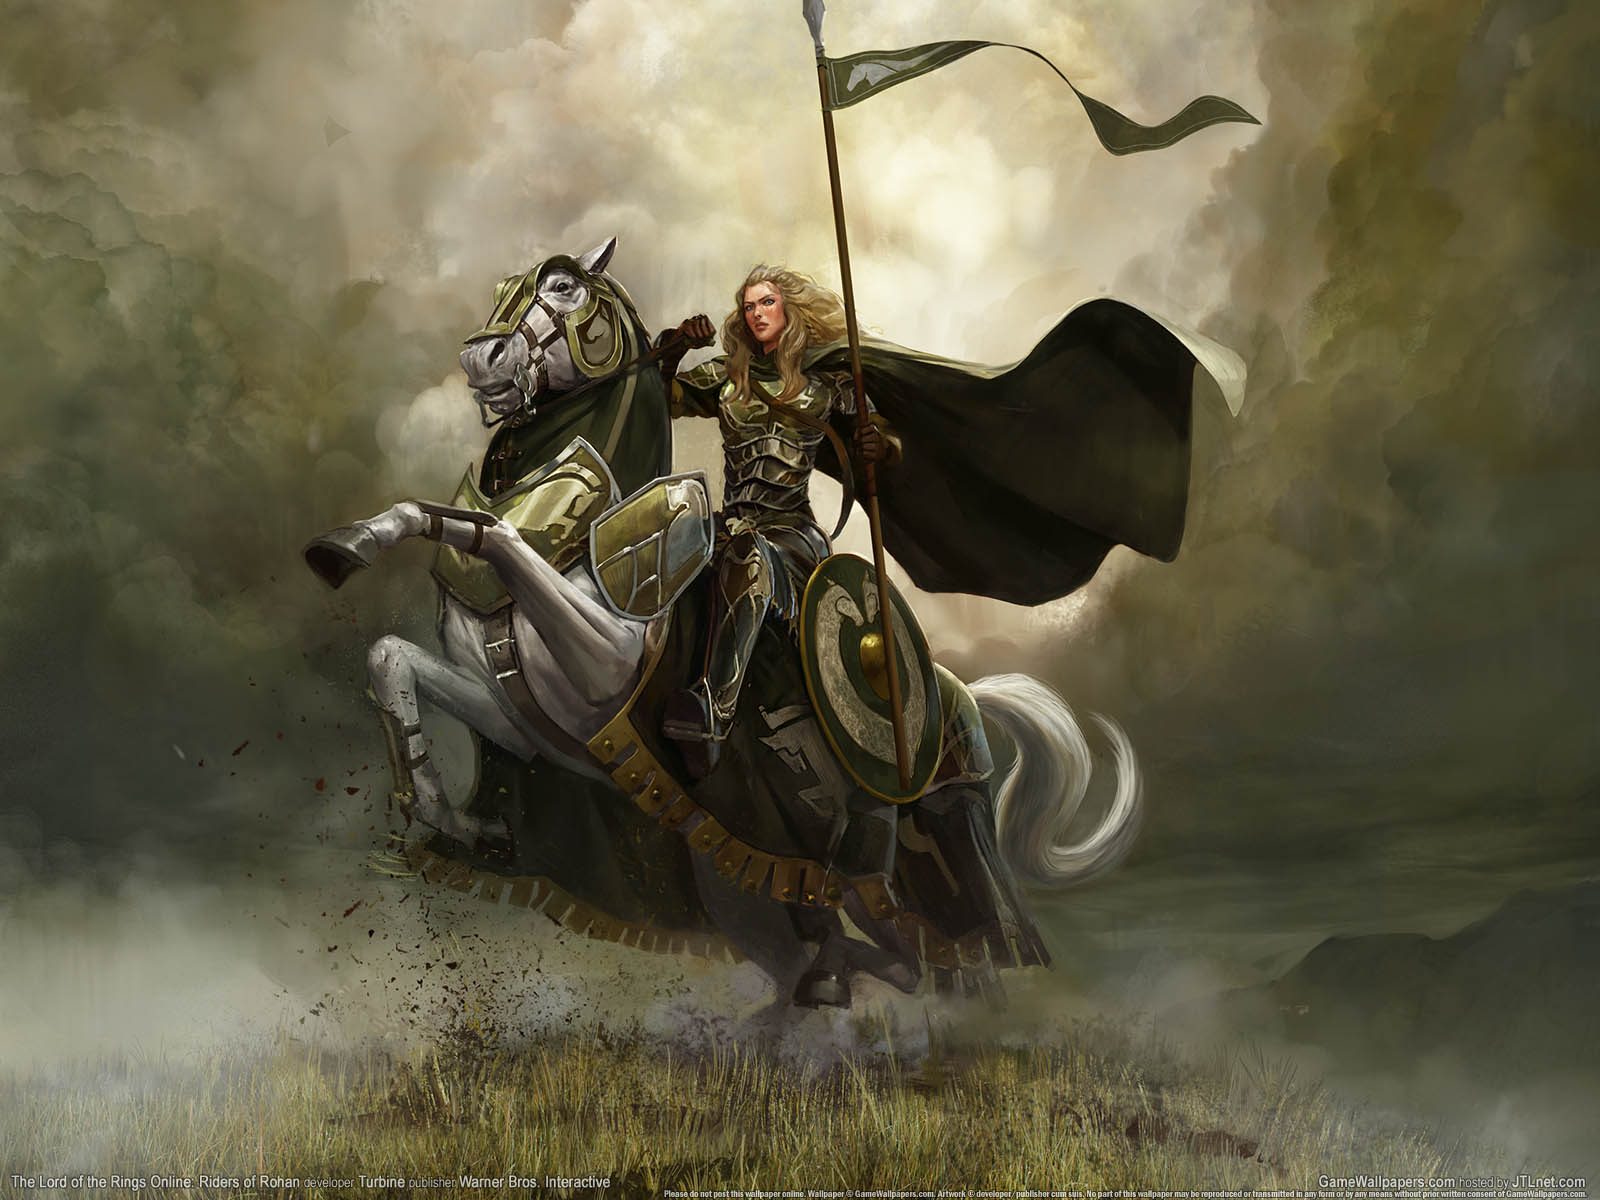 The Lord of the Rings Online%253A Riders of Rohan wallpaper 02 1600x1200